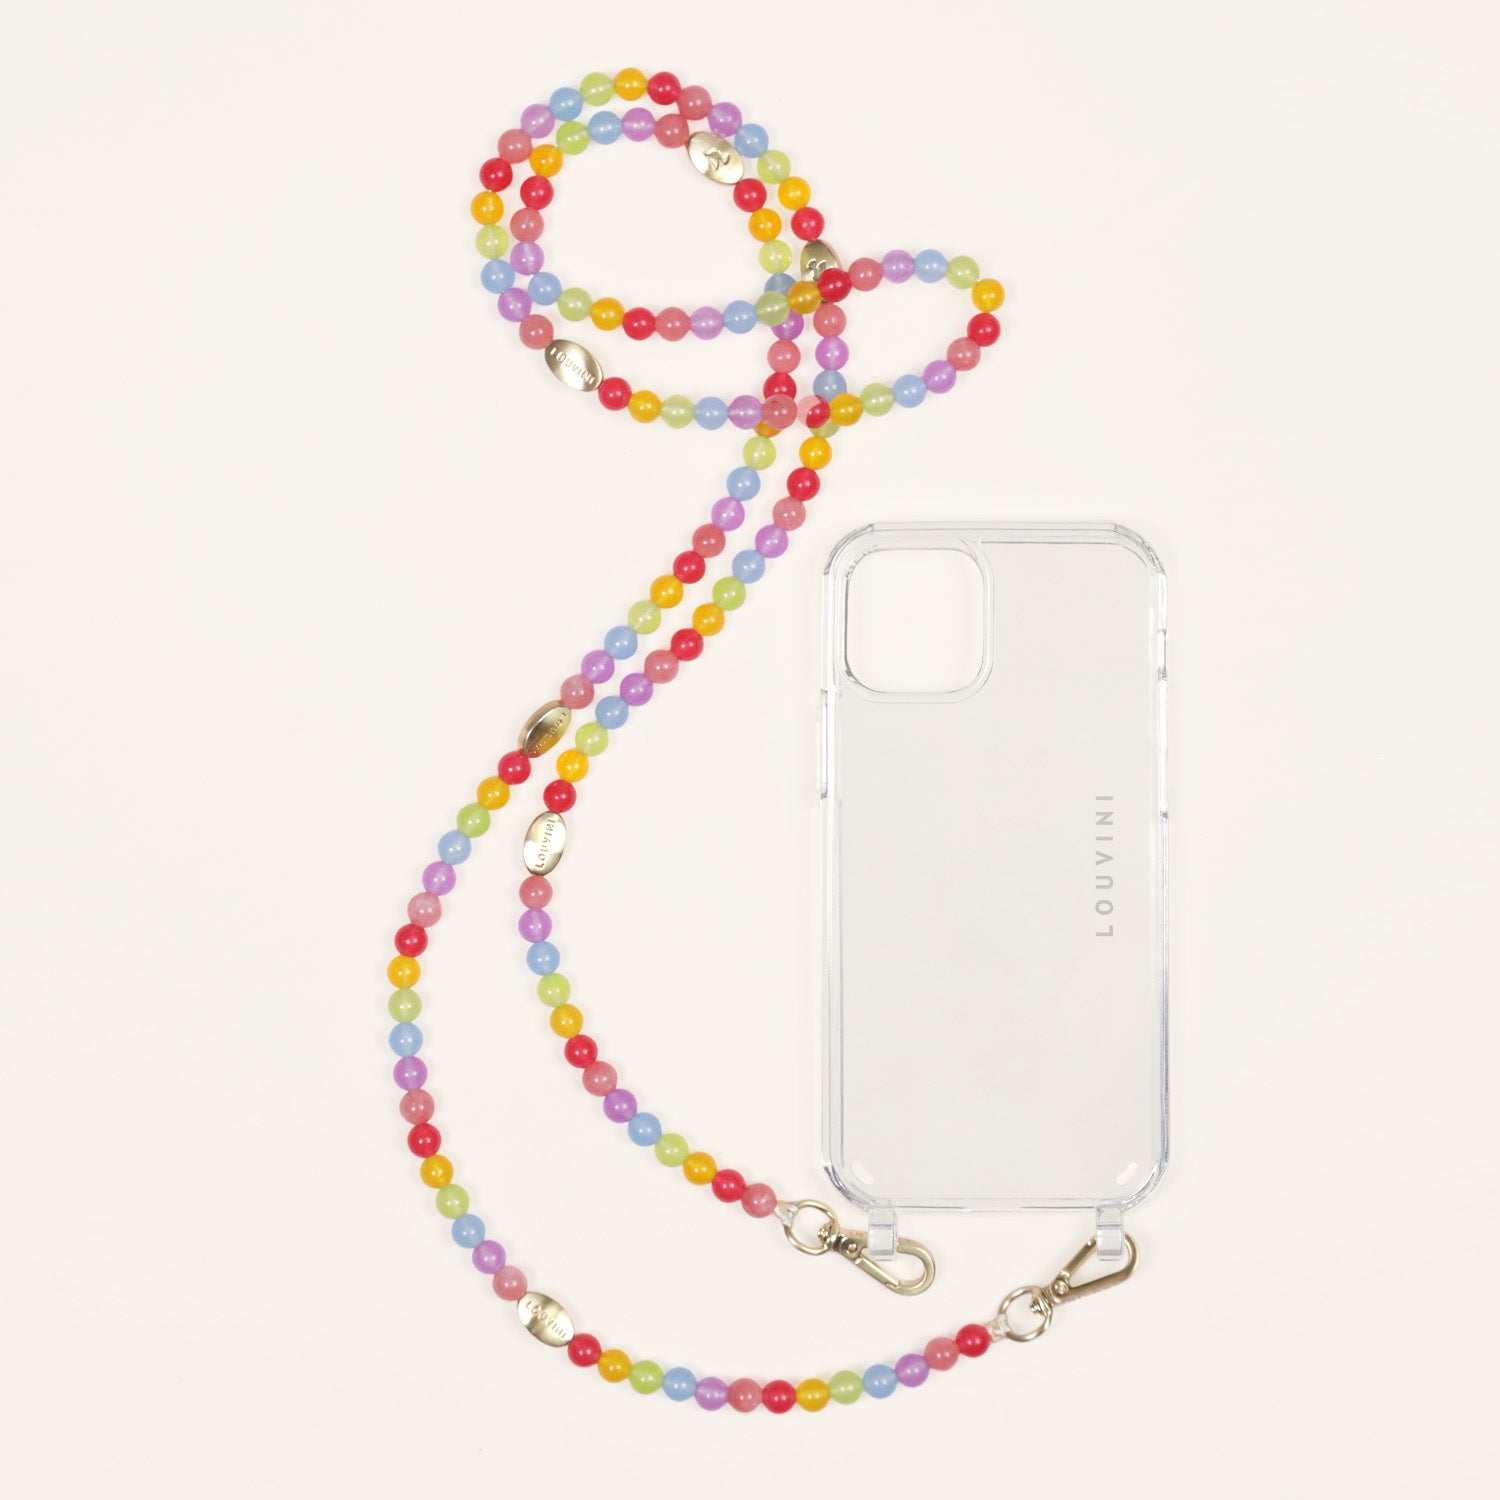 Charlie iPhone Case & Candice Strap